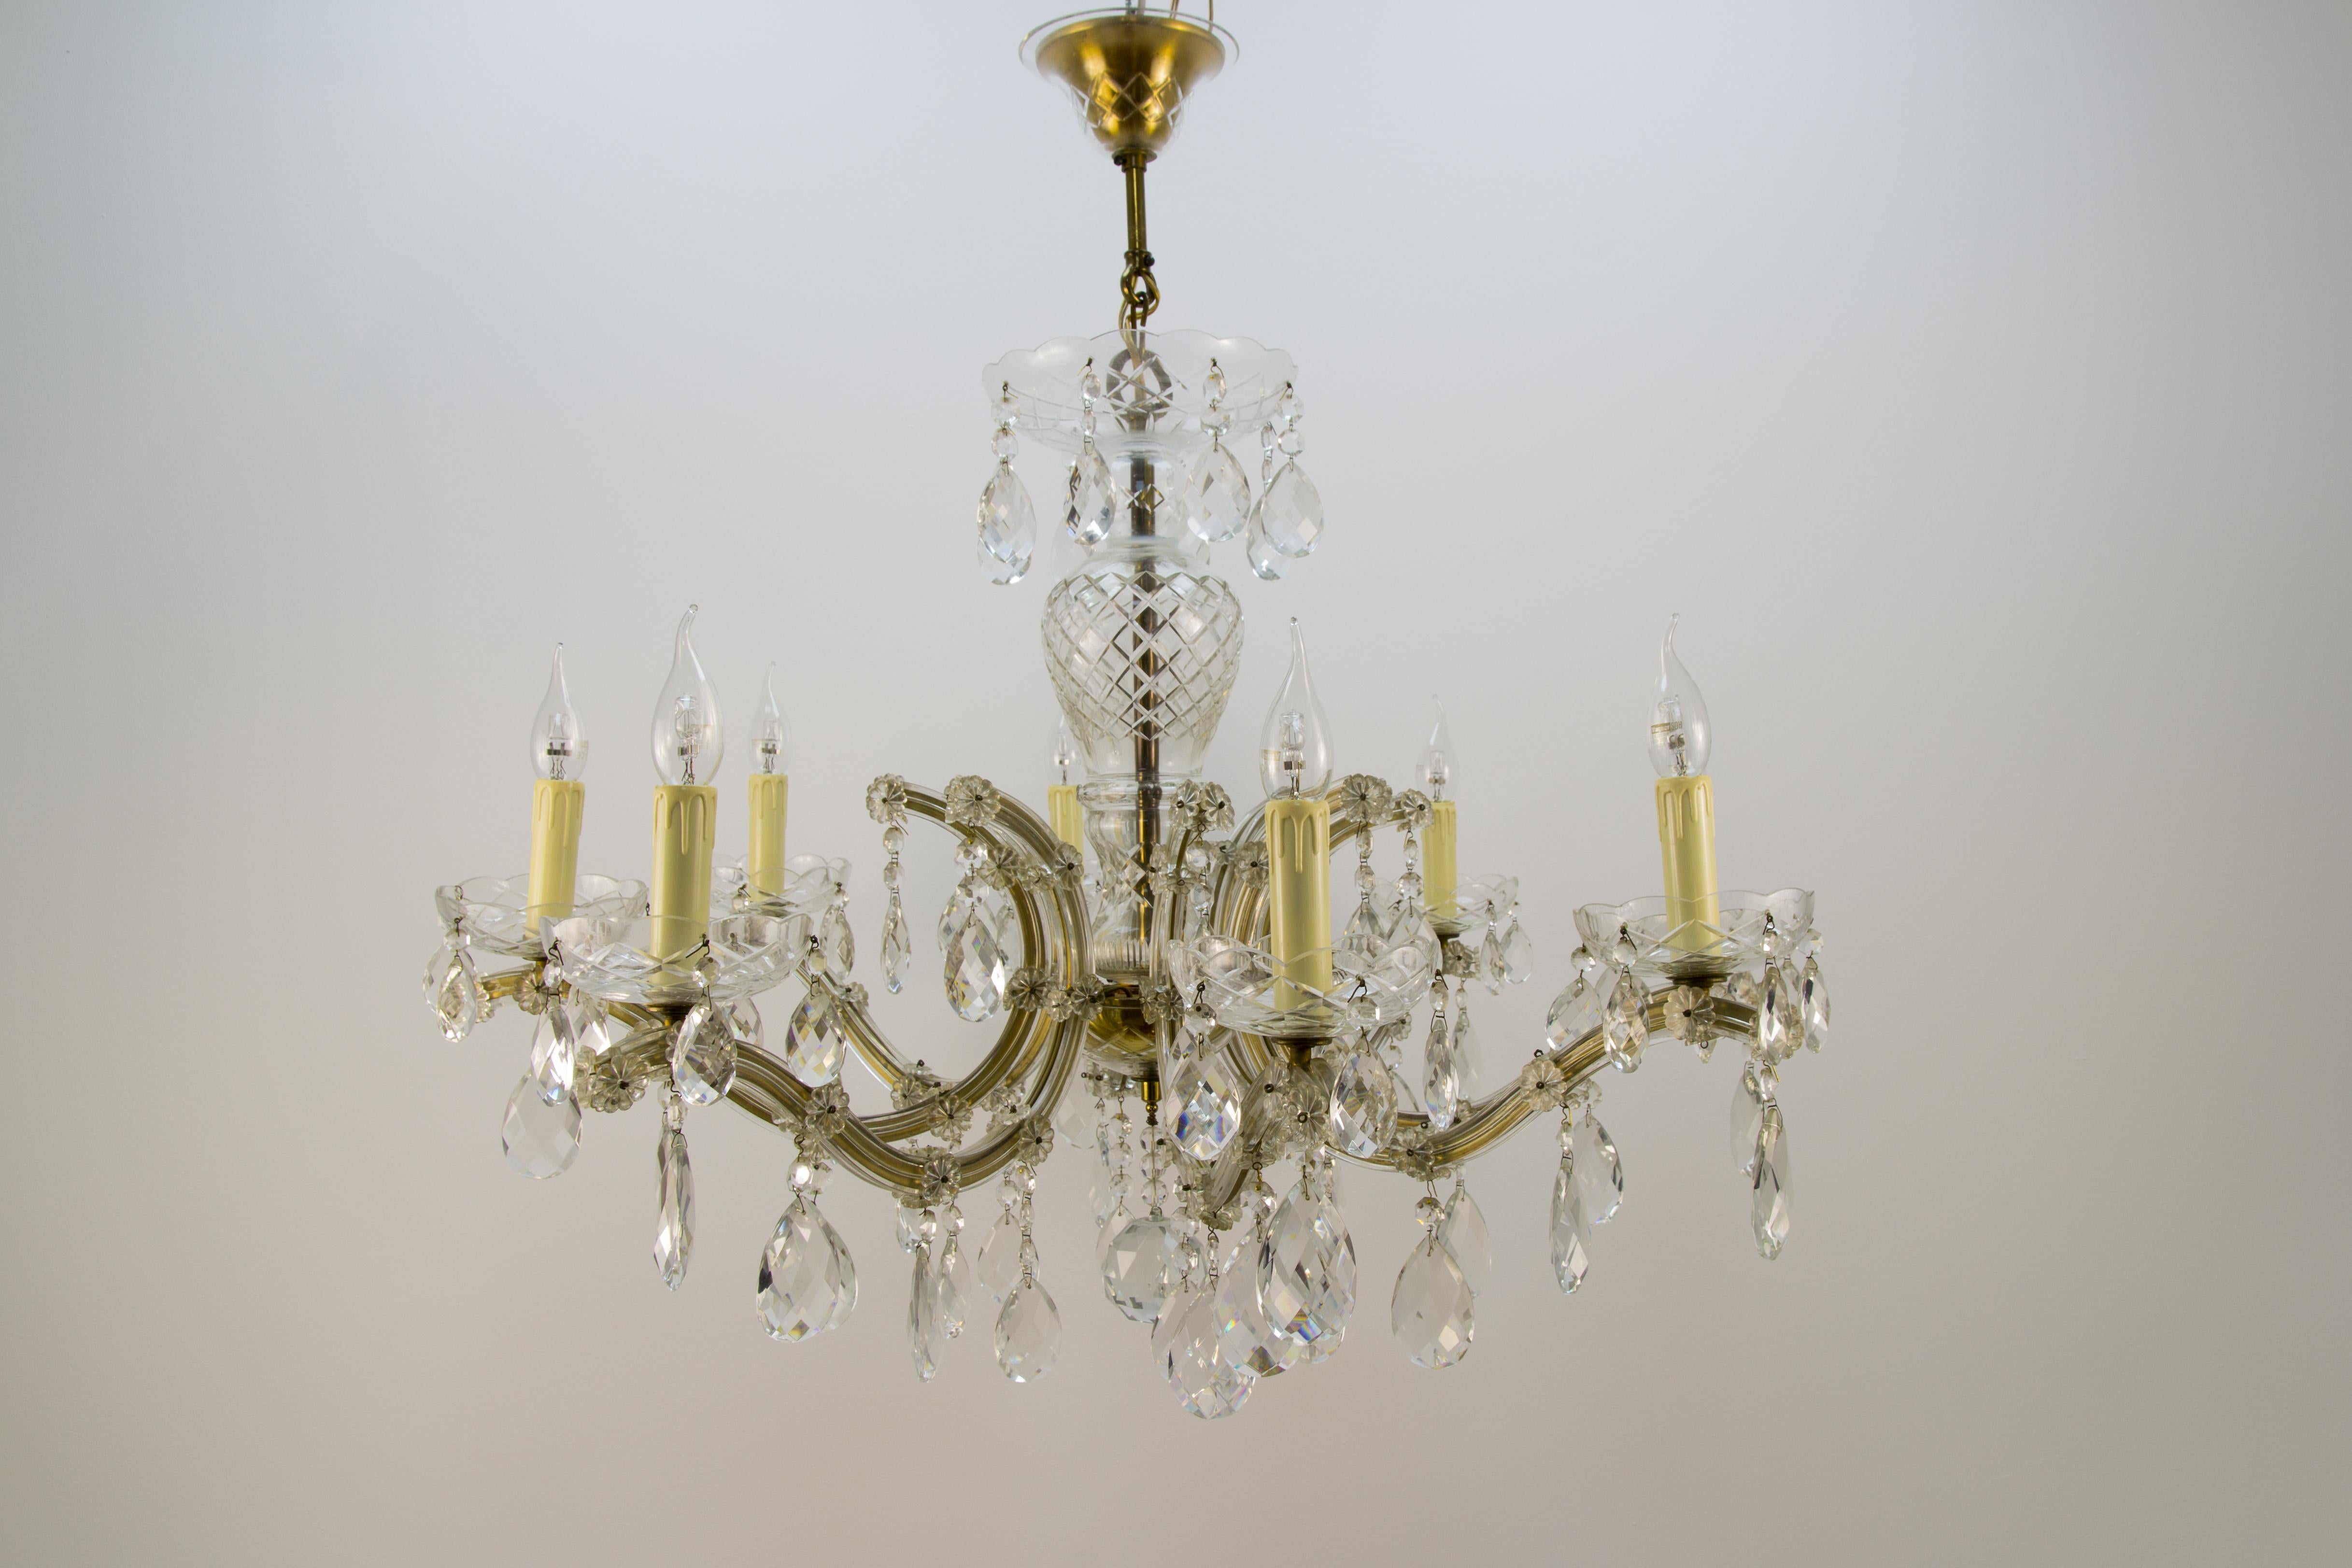 Beautiful Italian Maria Theresa style eight-light crystal chandelier. Brass and metal frame covered in glass with hanging crystal pendants, eight sockets for E14 size light bulbs.
Dimensions: Diameter 91 cm / 35.82 in; height 83 cm / 32.67 in.
The